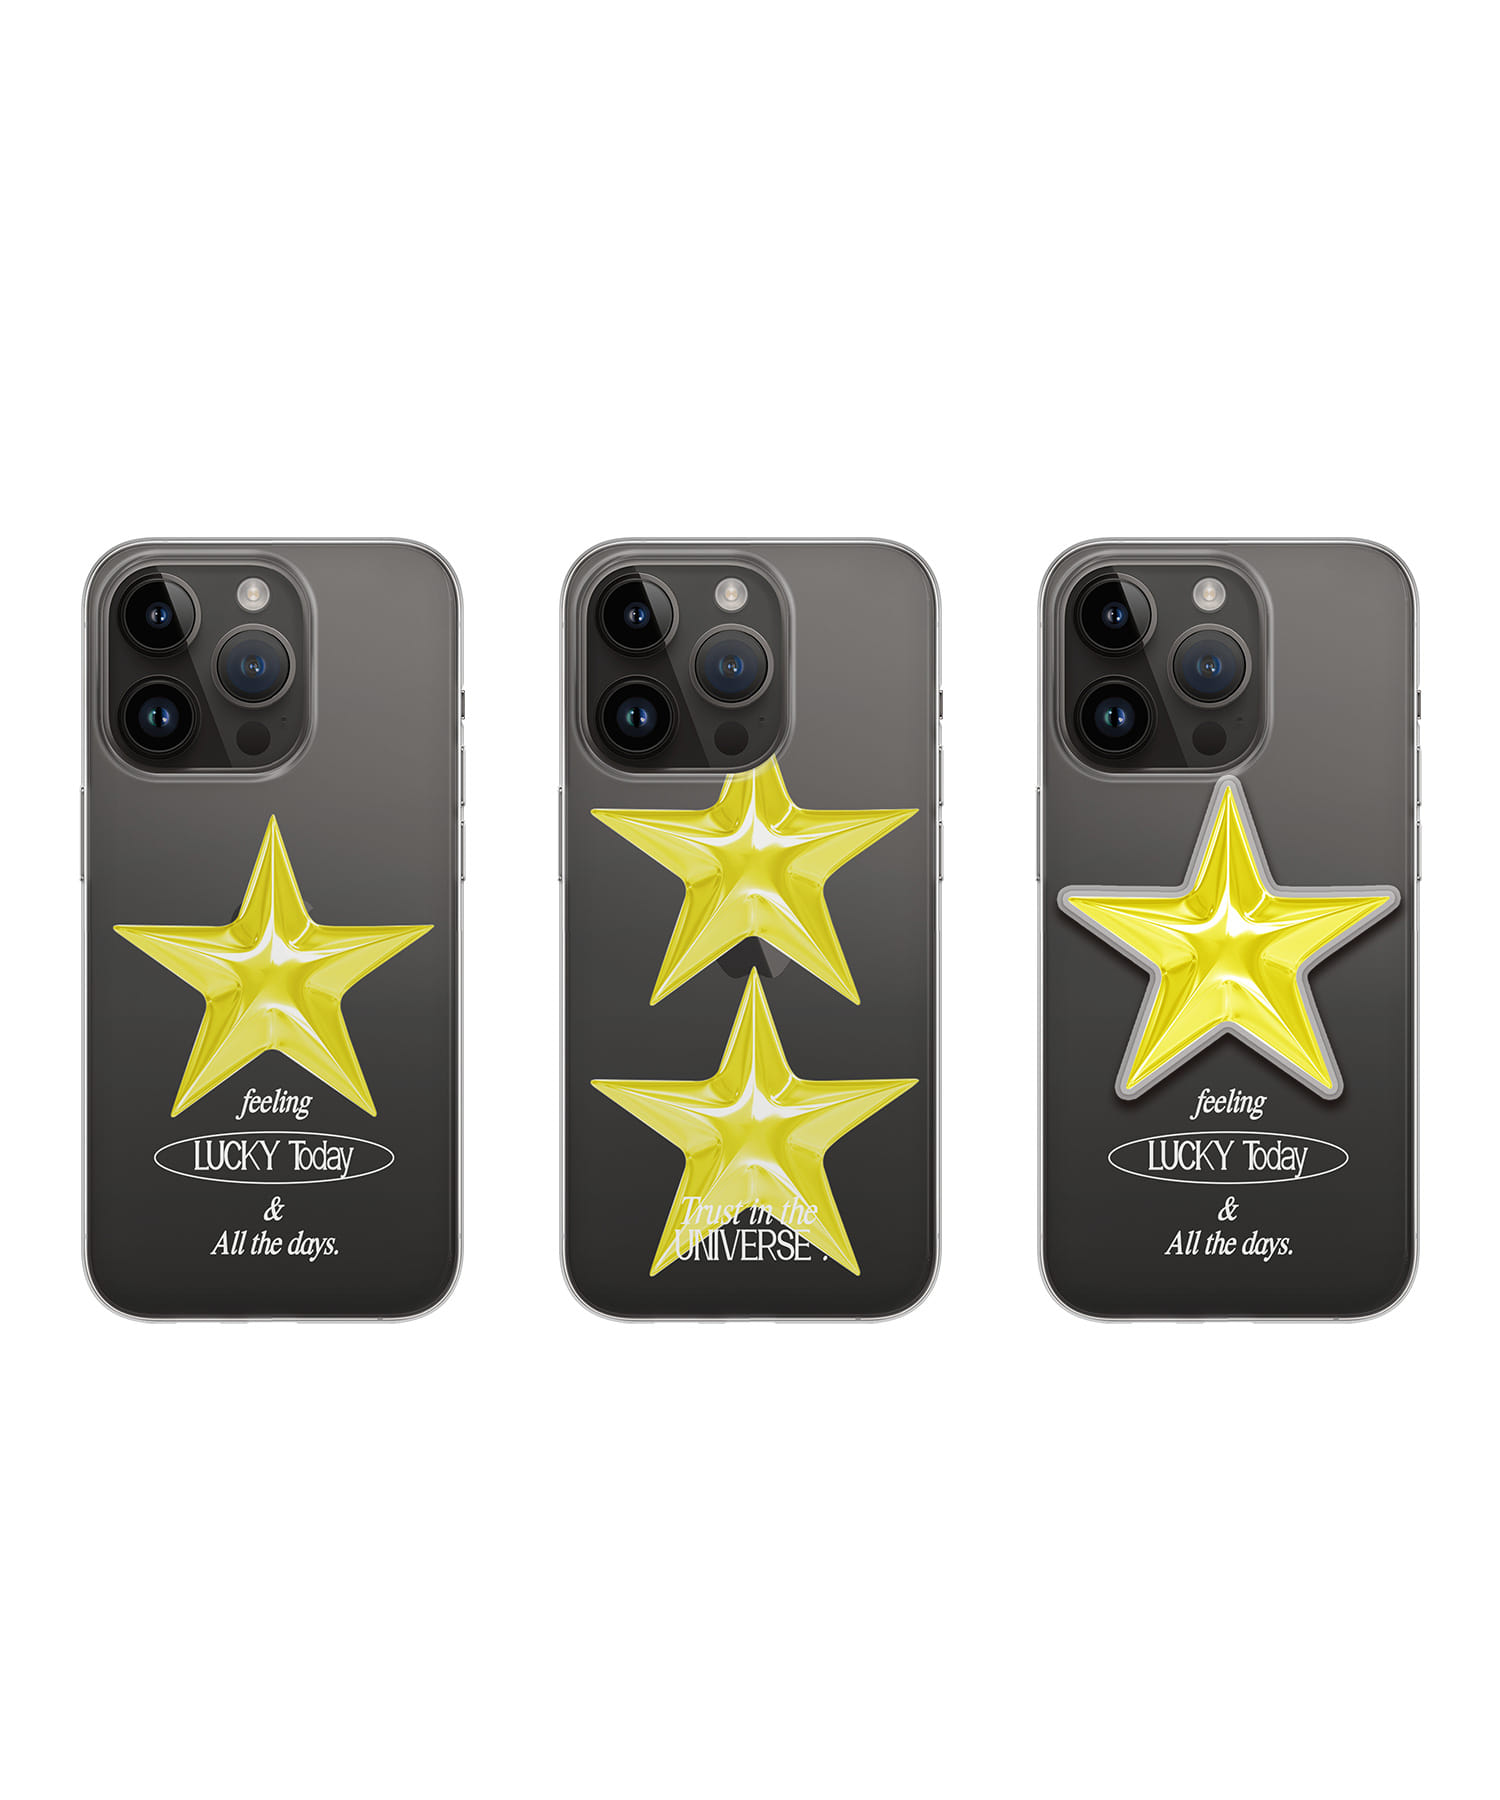 [Clear case] Gold star clear case series